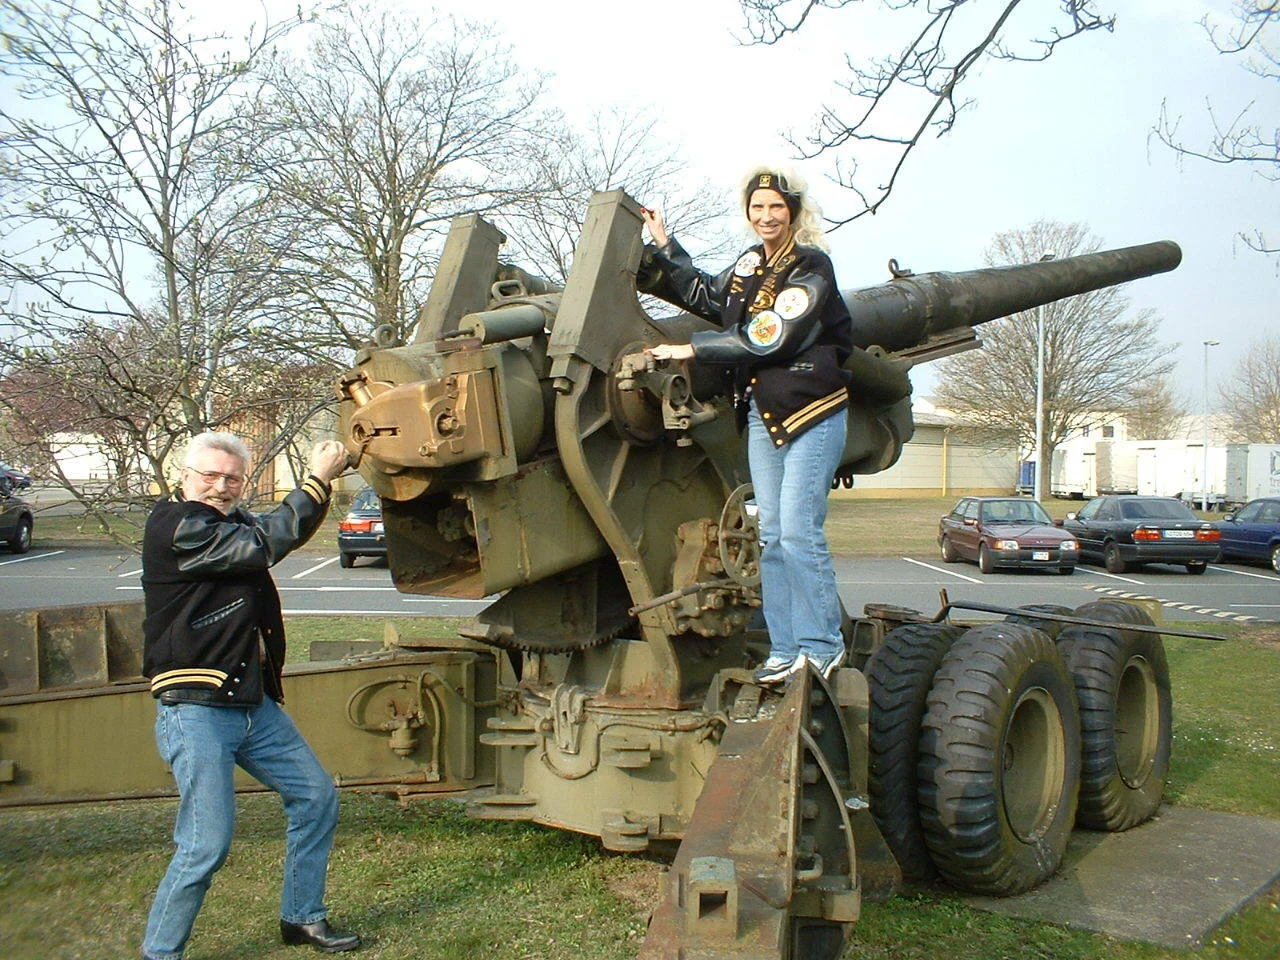 Road Rage Rudy and Donna Moore posing on a tank at a military base in Germany